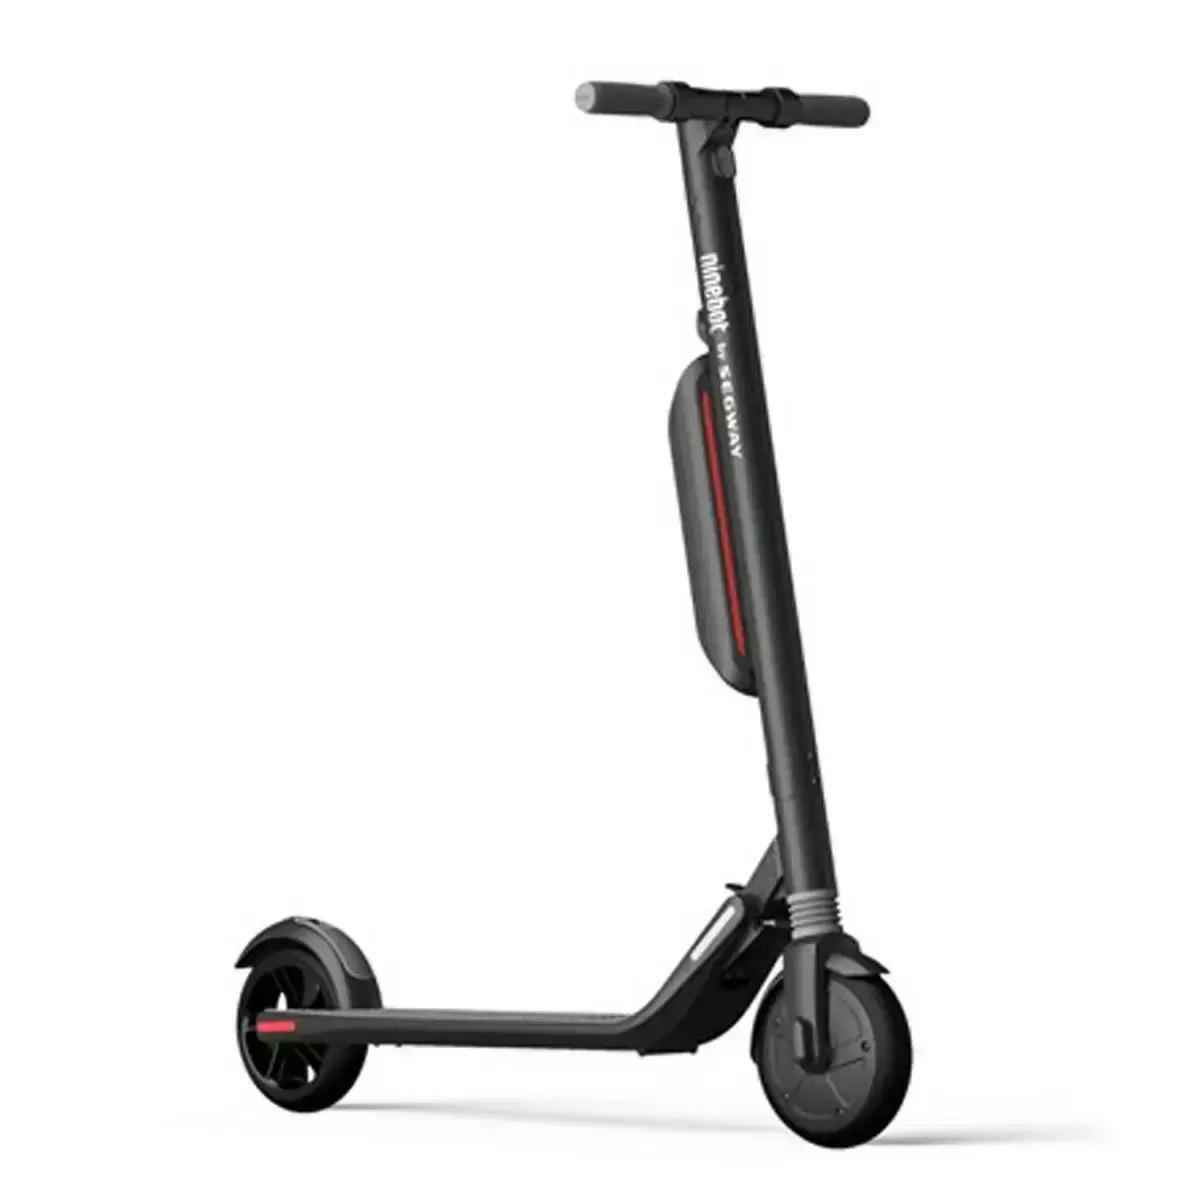 Segway Ninebot ES3 Folding Electric Scooter for $229.99 Shipped